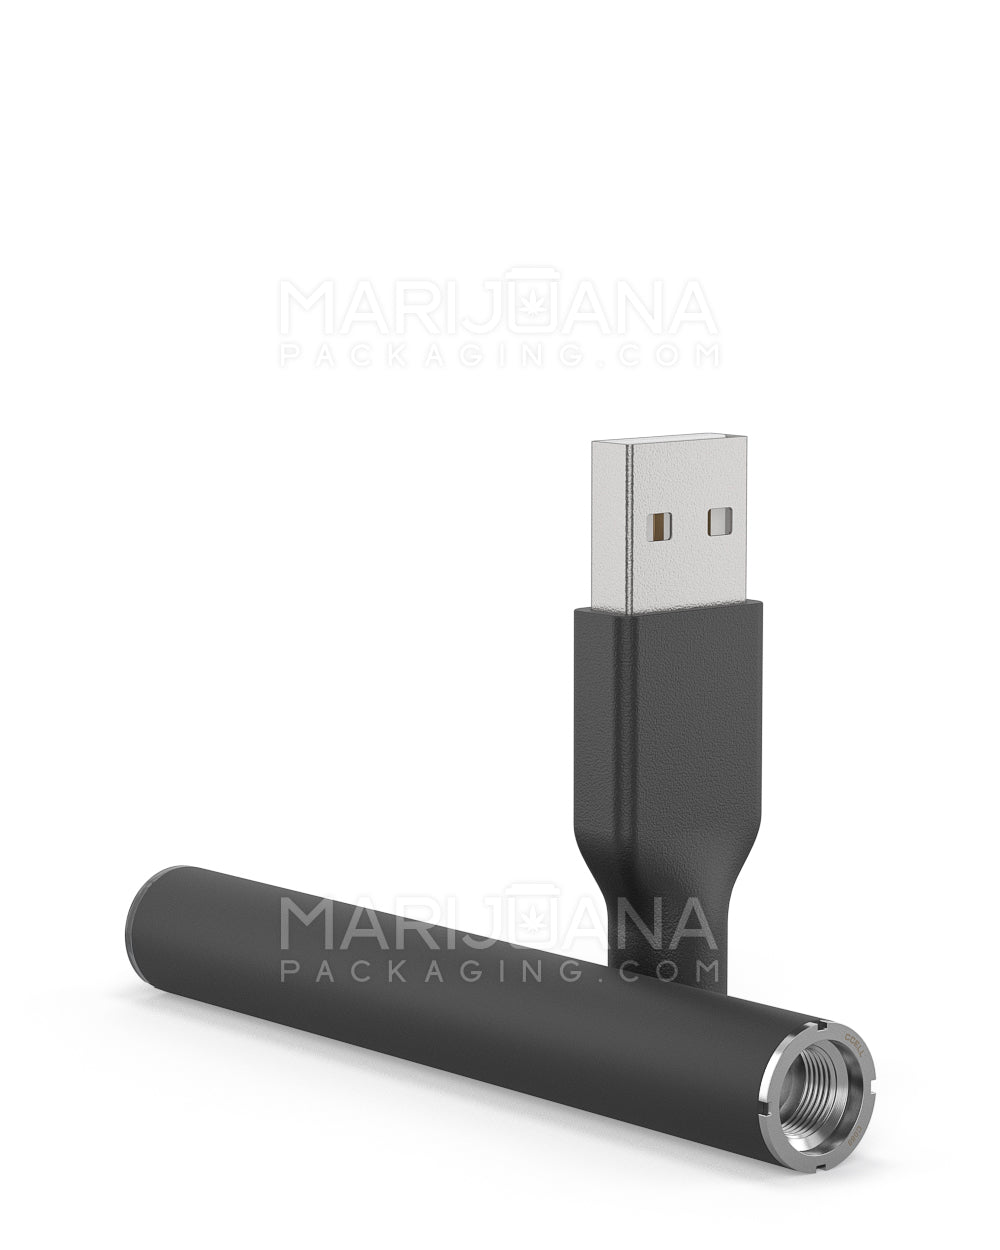 CCELL | M3 Soft Touch Vape Batteries with USB Charger | 340mAh - Black - 100 Count